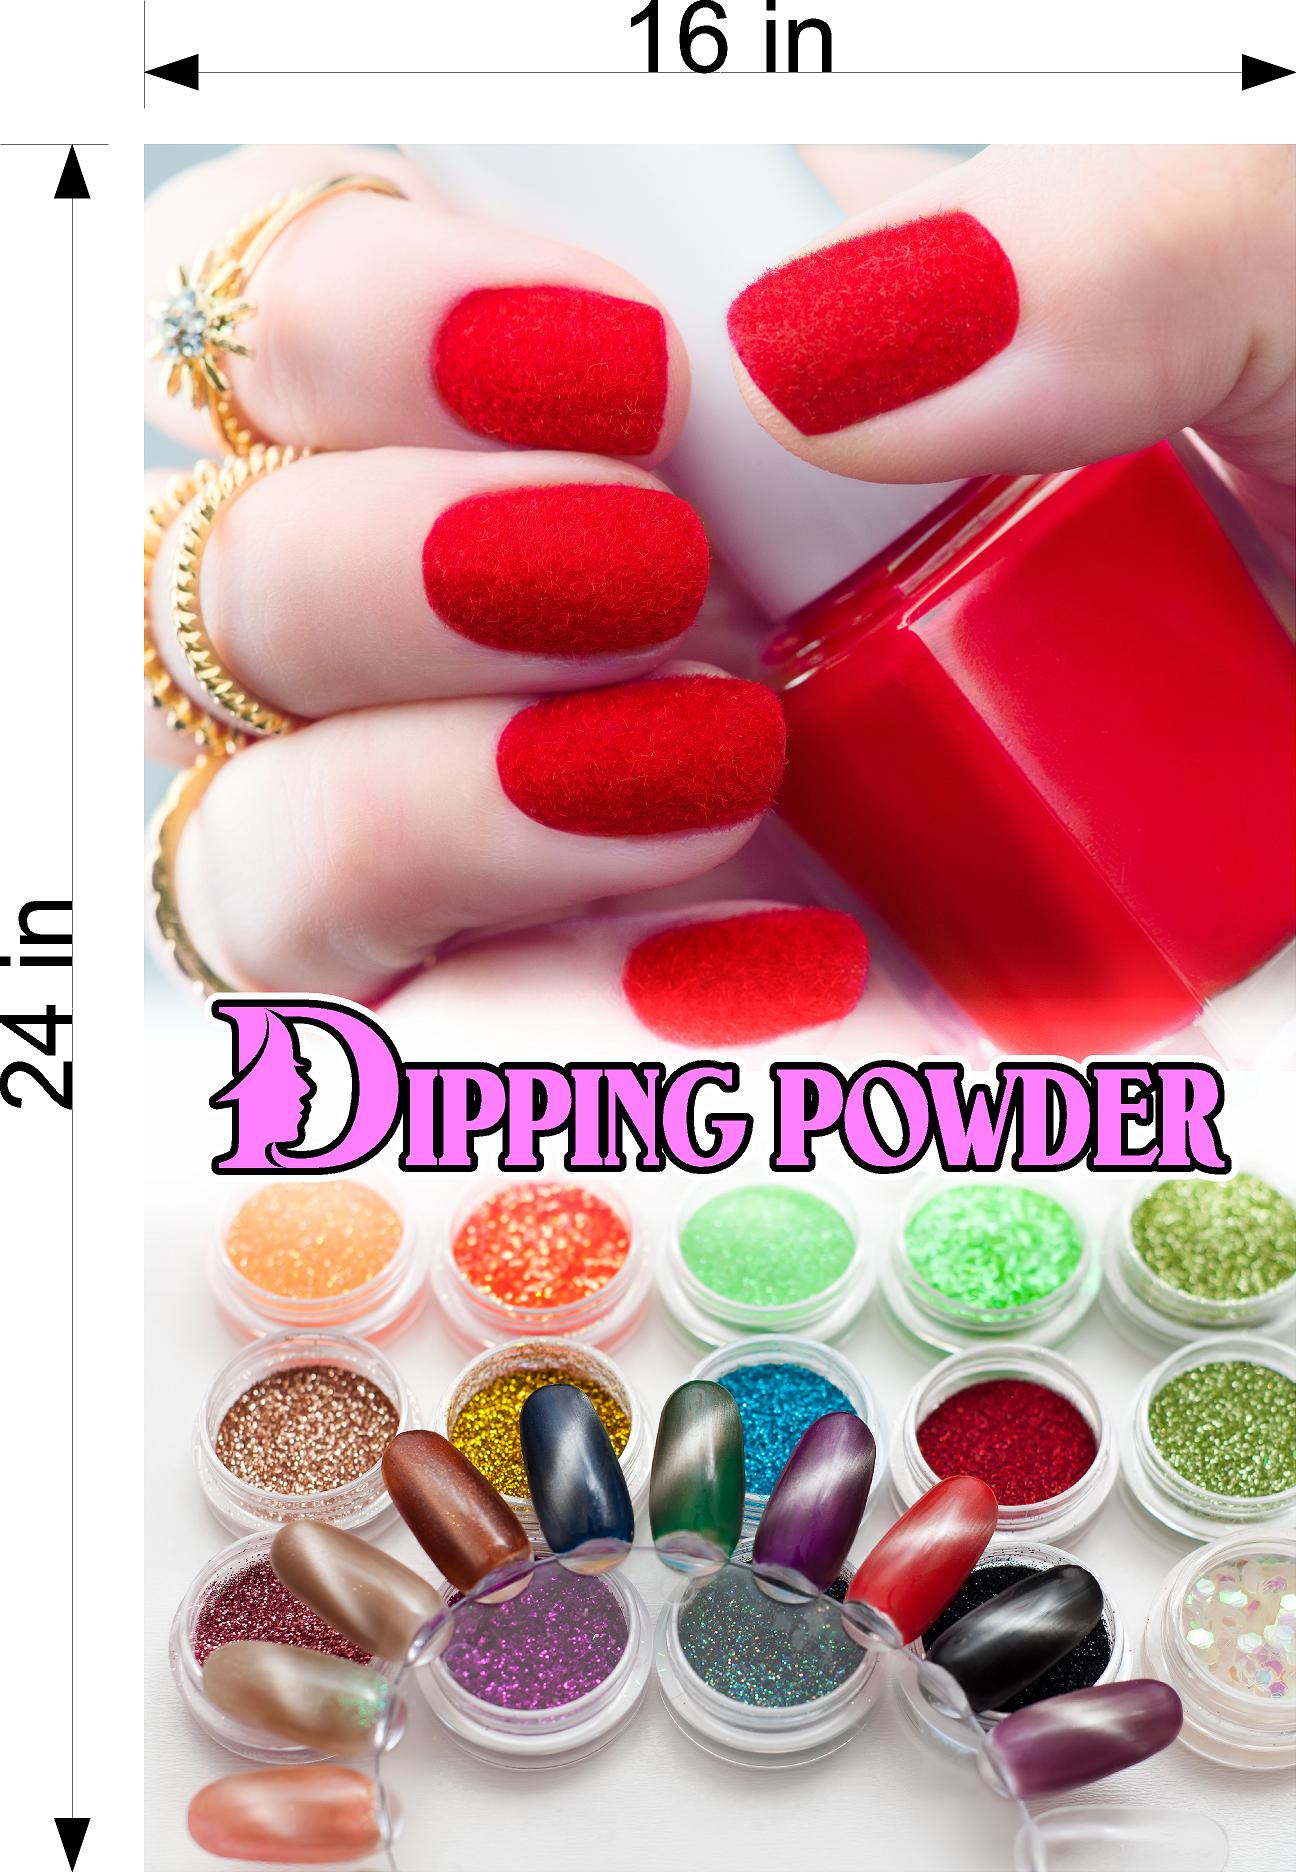 Dipping Powder 05 Wallpaper Poster Decal with Adhesive Backing Wall Sticker Decor Nail Salon Sign Vertical